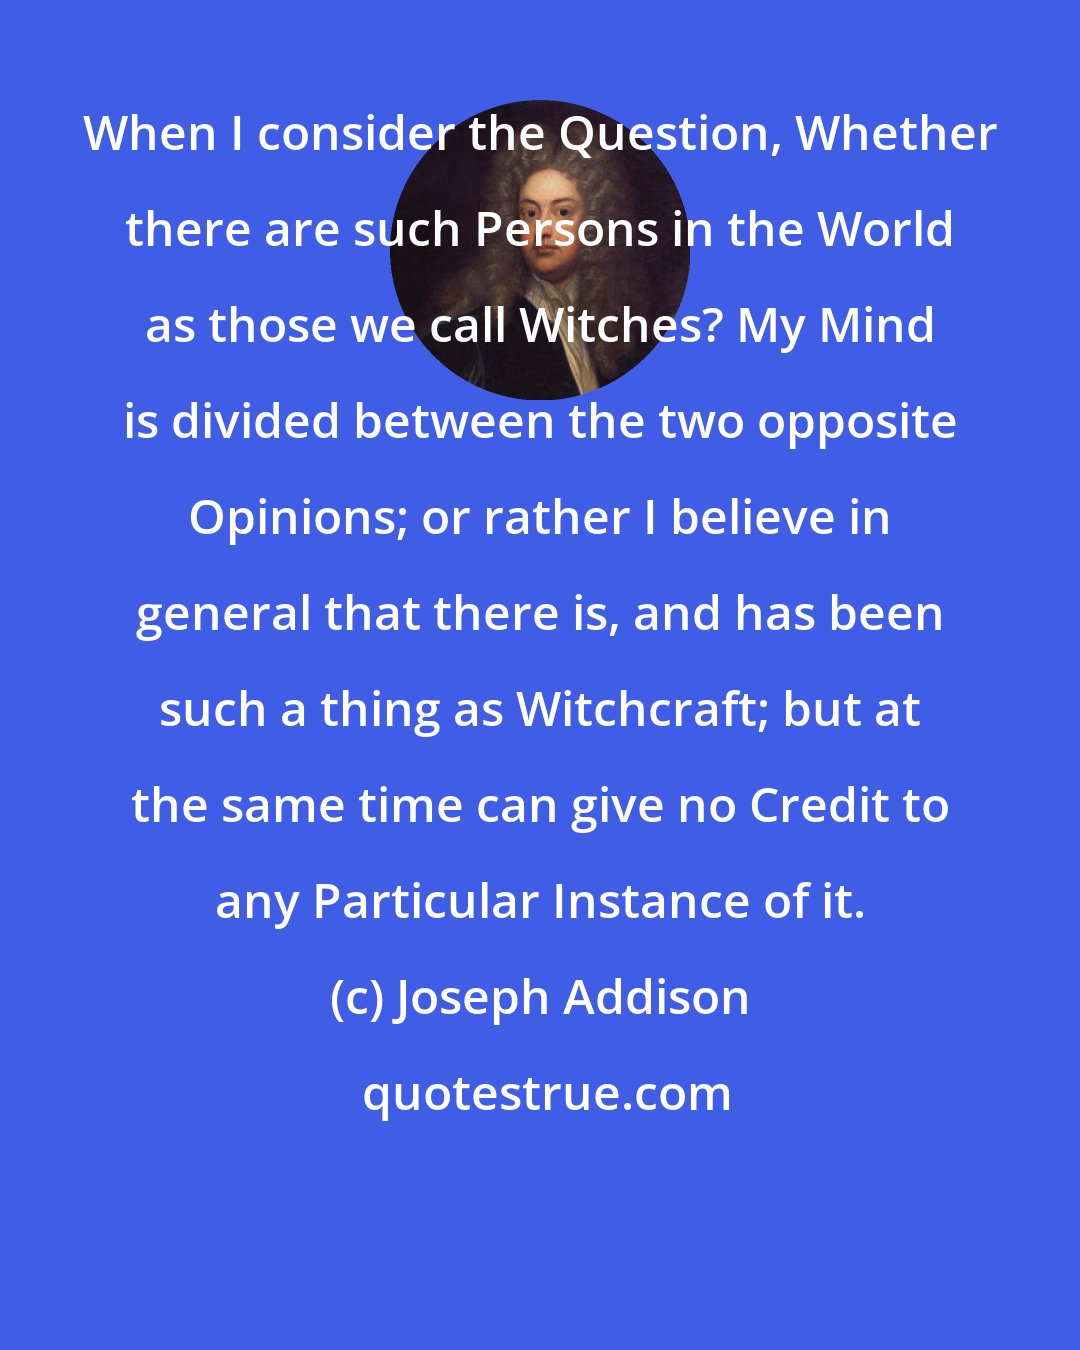 Joseph Addison: When I consider the Question, Whether there are such Persons in the World as those we call Witches? My Mind is divided between the two opposite Opinions; or rather I believe in general that there is, and has been such a thing as Witchcraft; but at the same time can give no Credit to any Particular Instance of it.